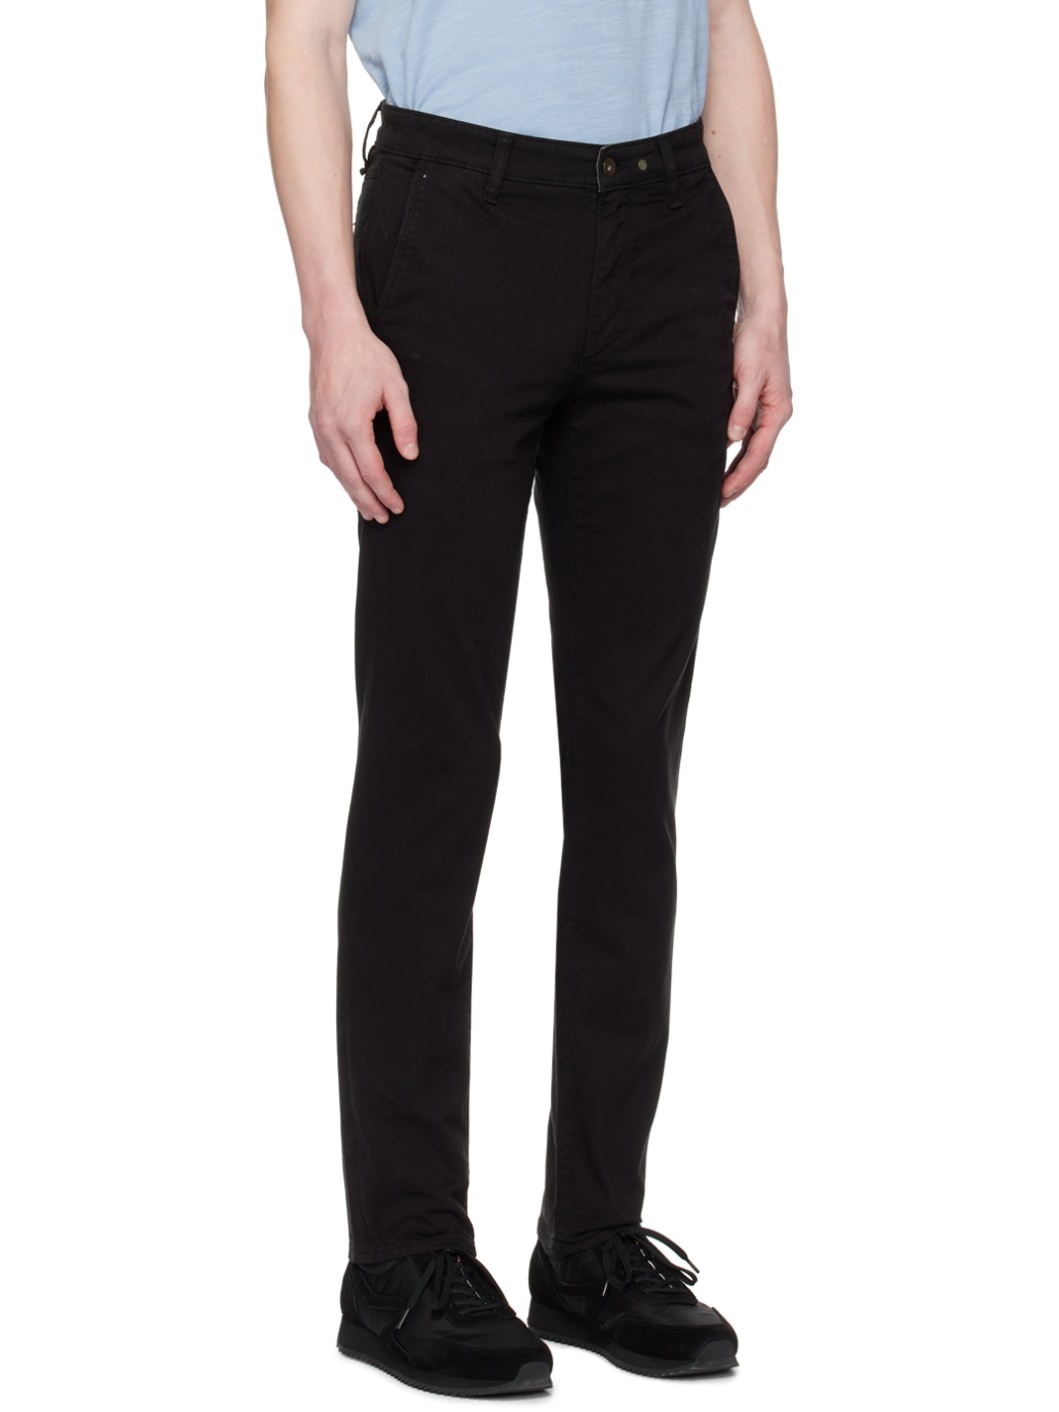 Black Fit 2 Trousers - 2